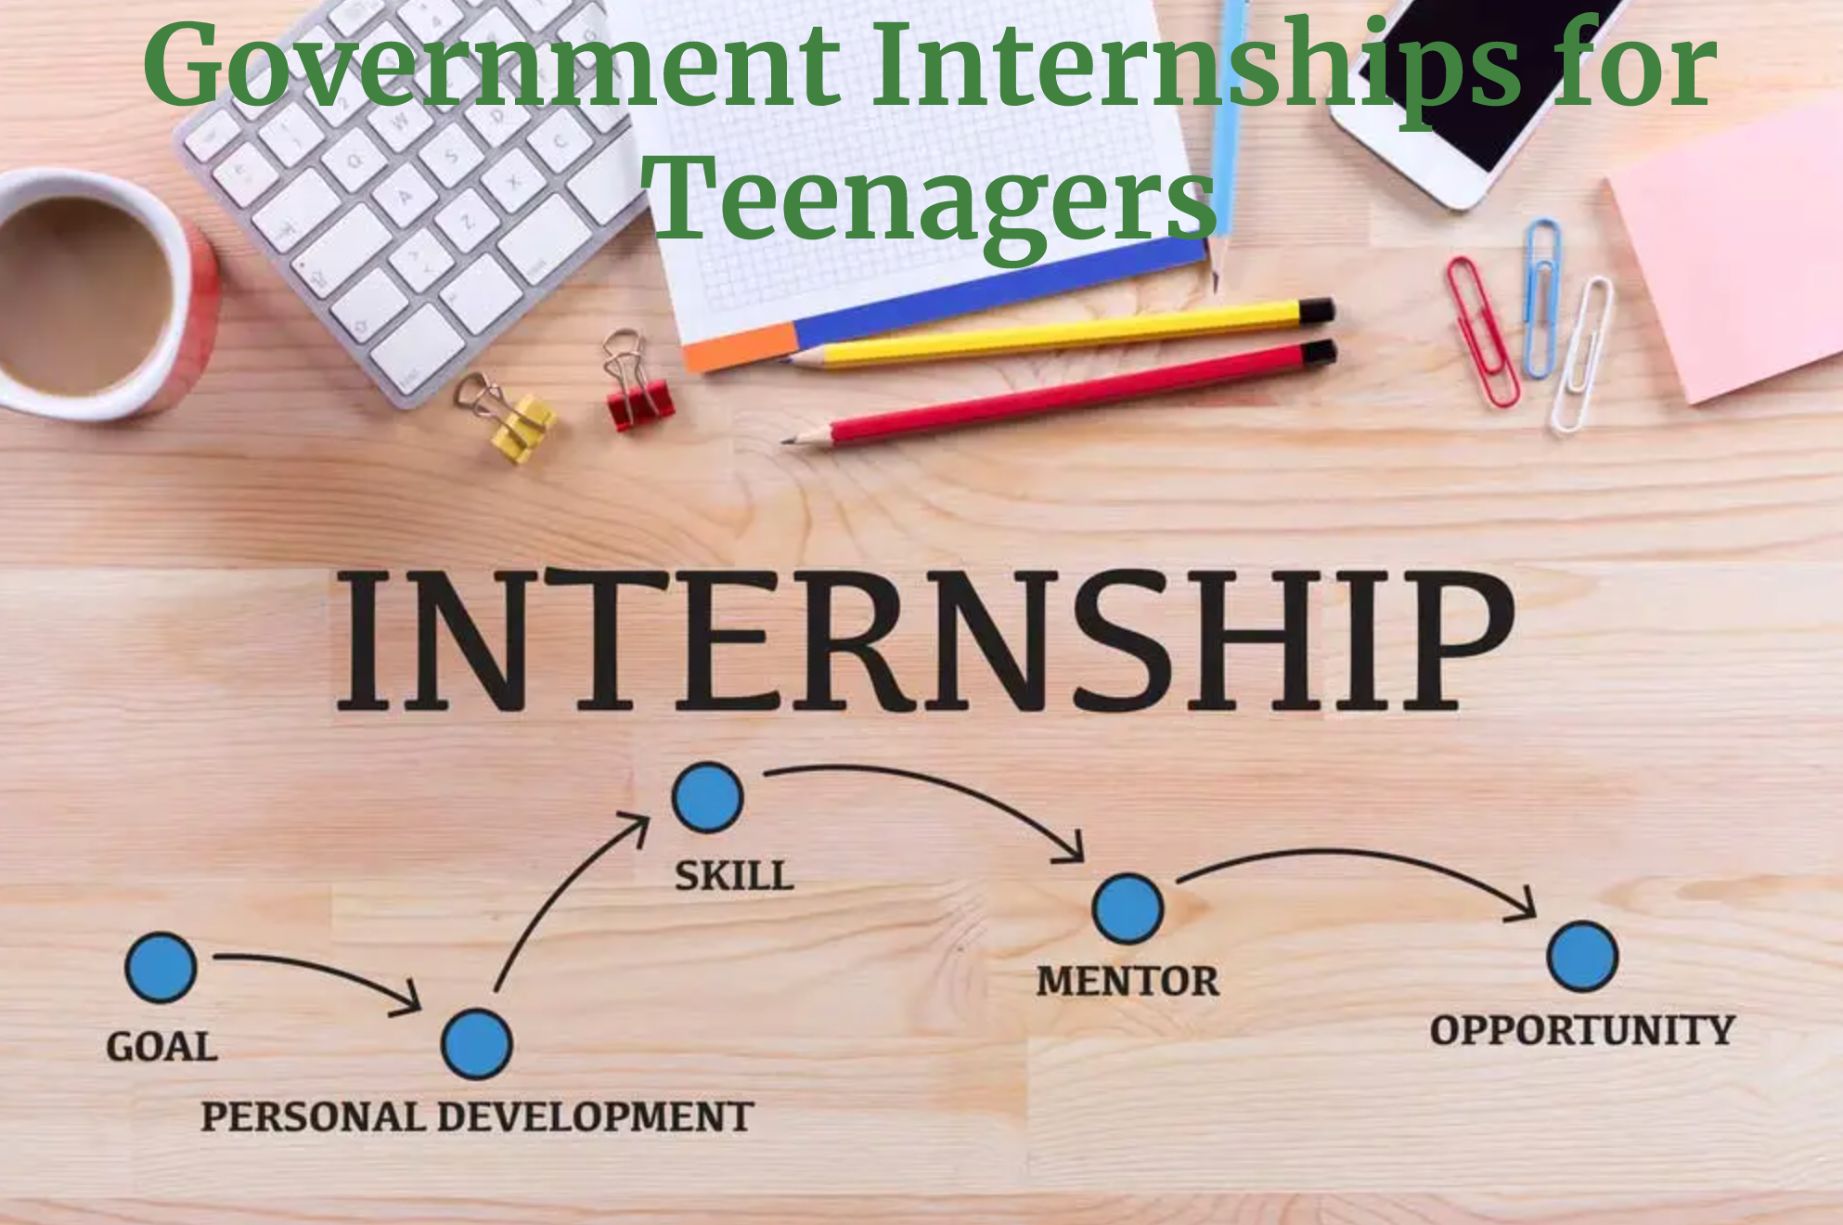 Government Internships for Teenagers